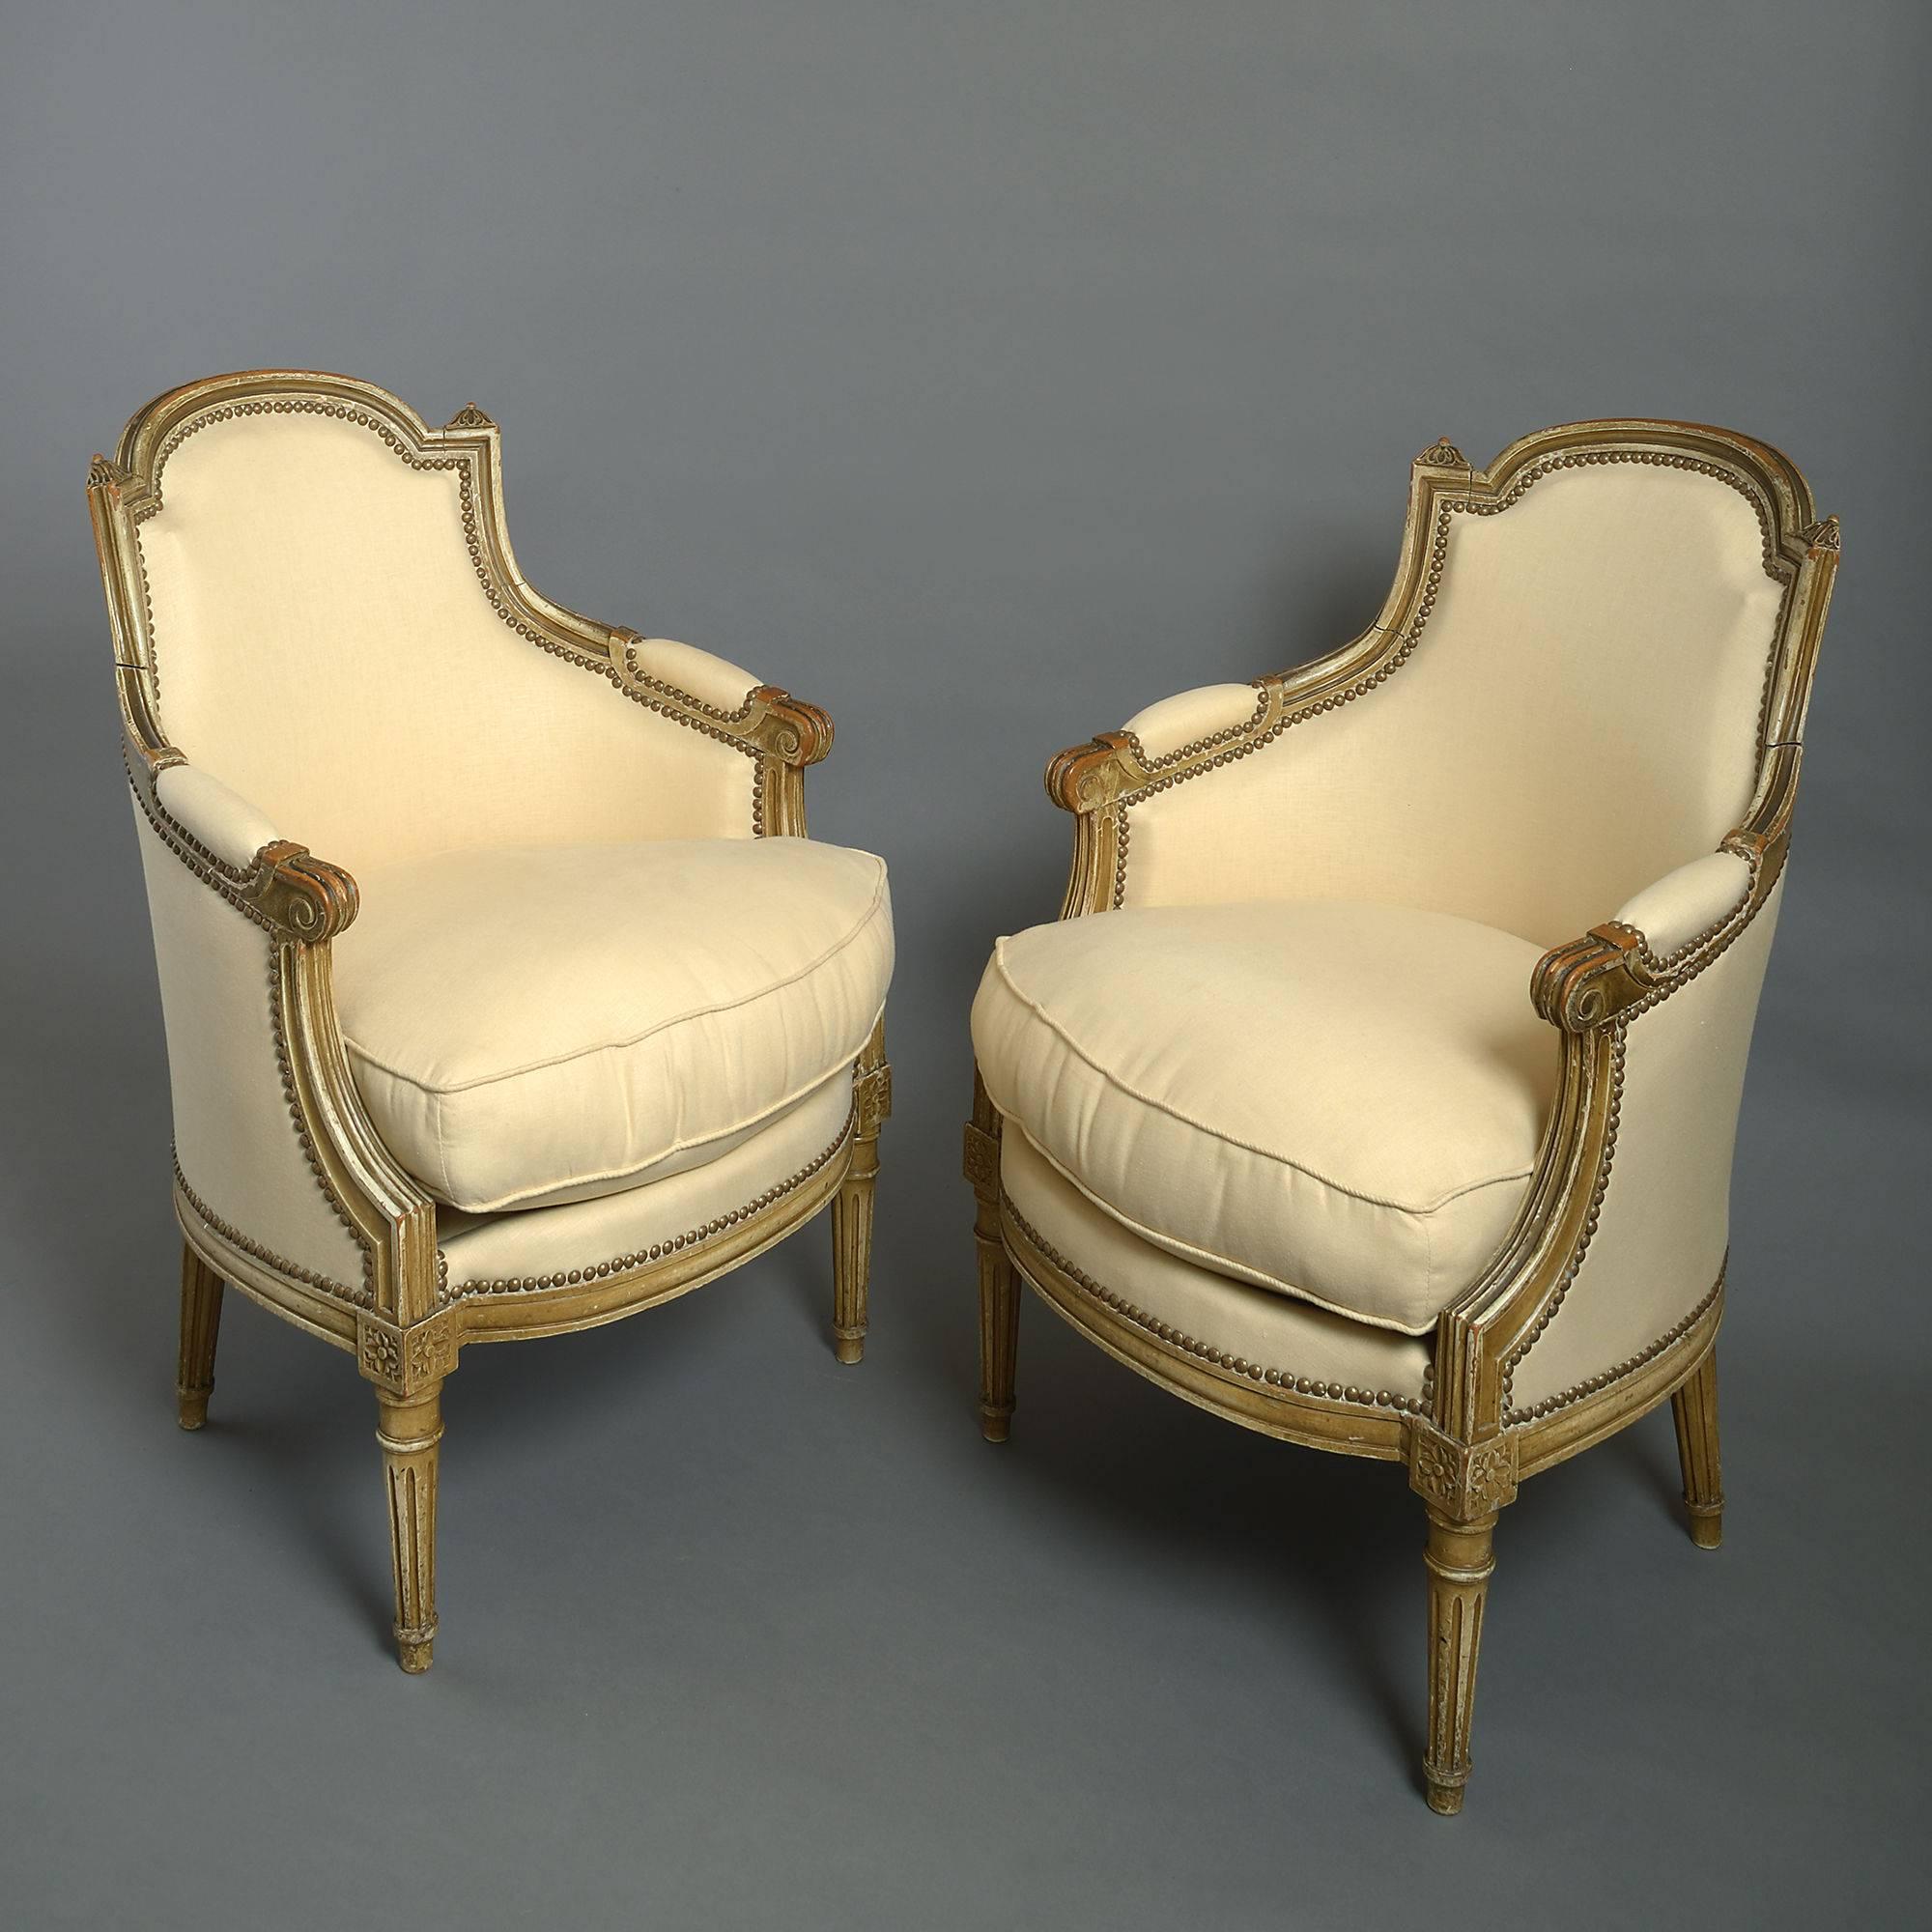 A late 19th century pair of painted bergère armchairs in the Louis XVI manner, the arched backs with finials, scrolling arms and all raised upon turned tapering legs. 

Upholstered in a cream linen with patinated brass studs.